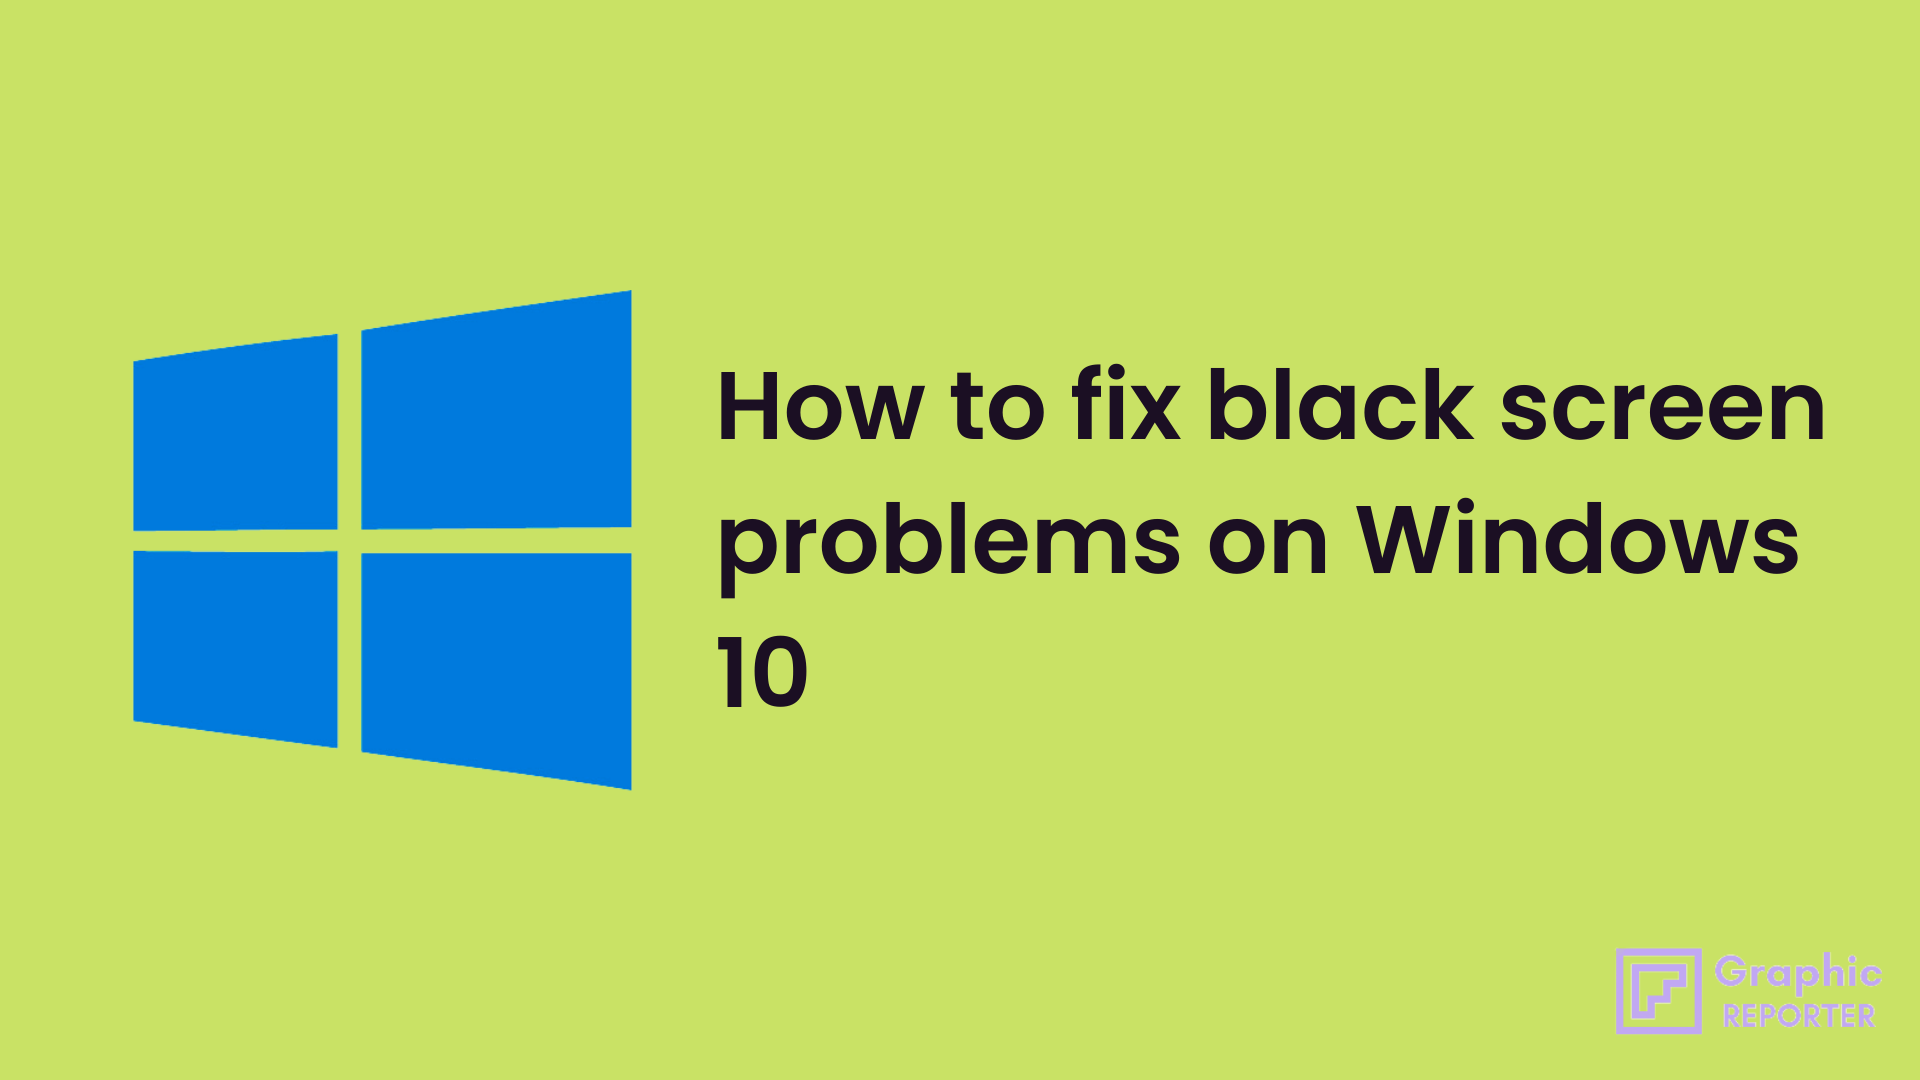 How to fix black screen problems on Windows 10